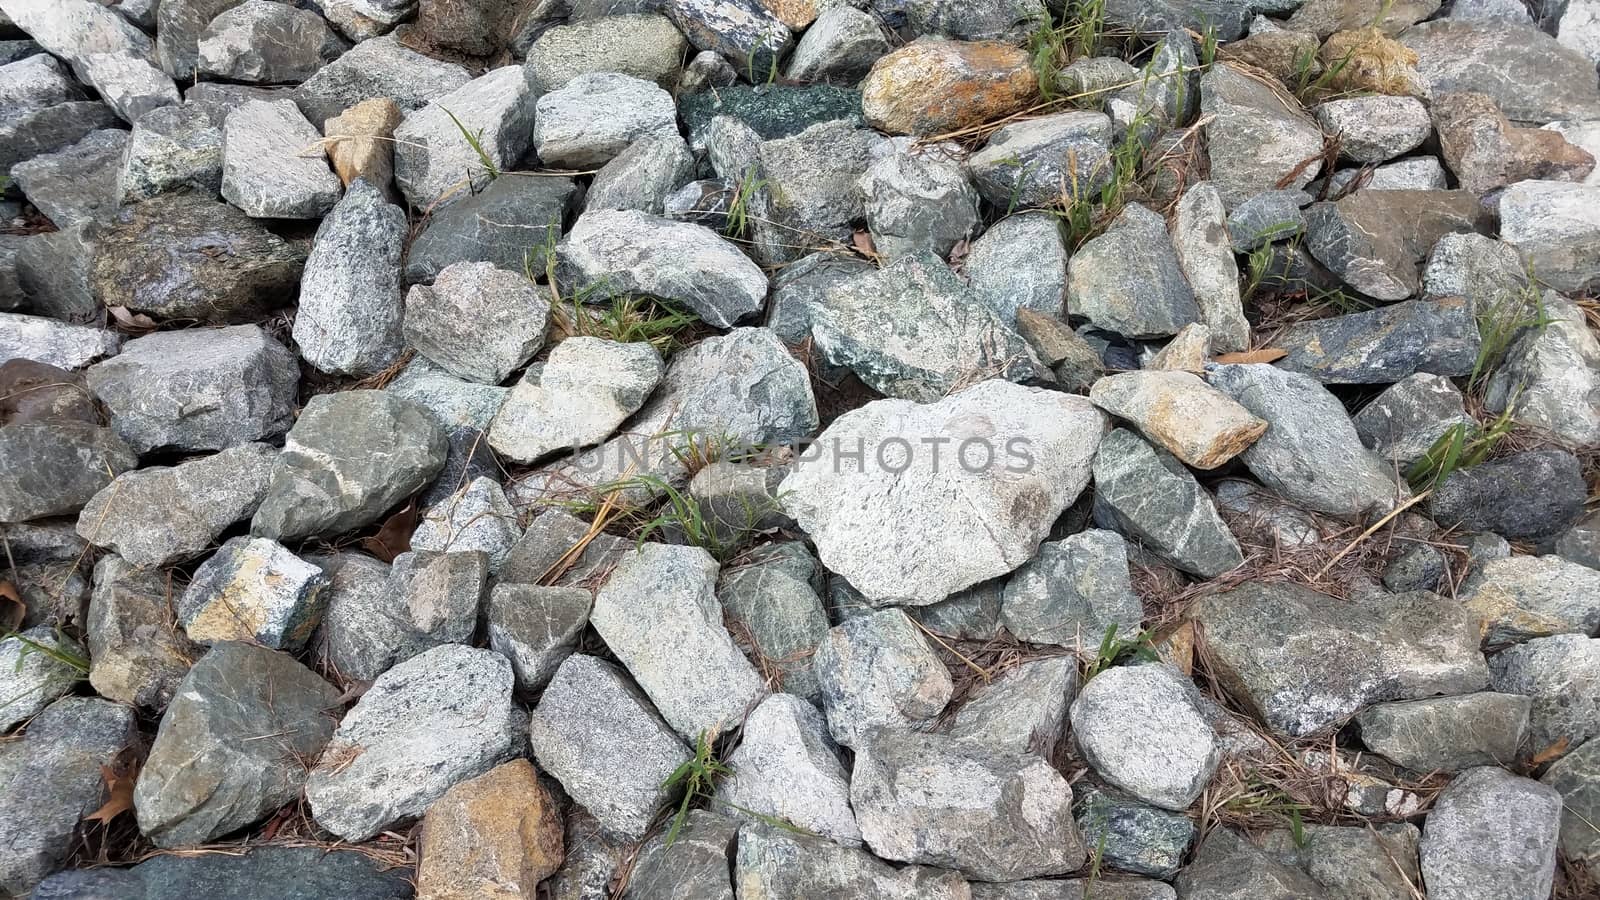 pile of grey rocks or stones or boulders or background